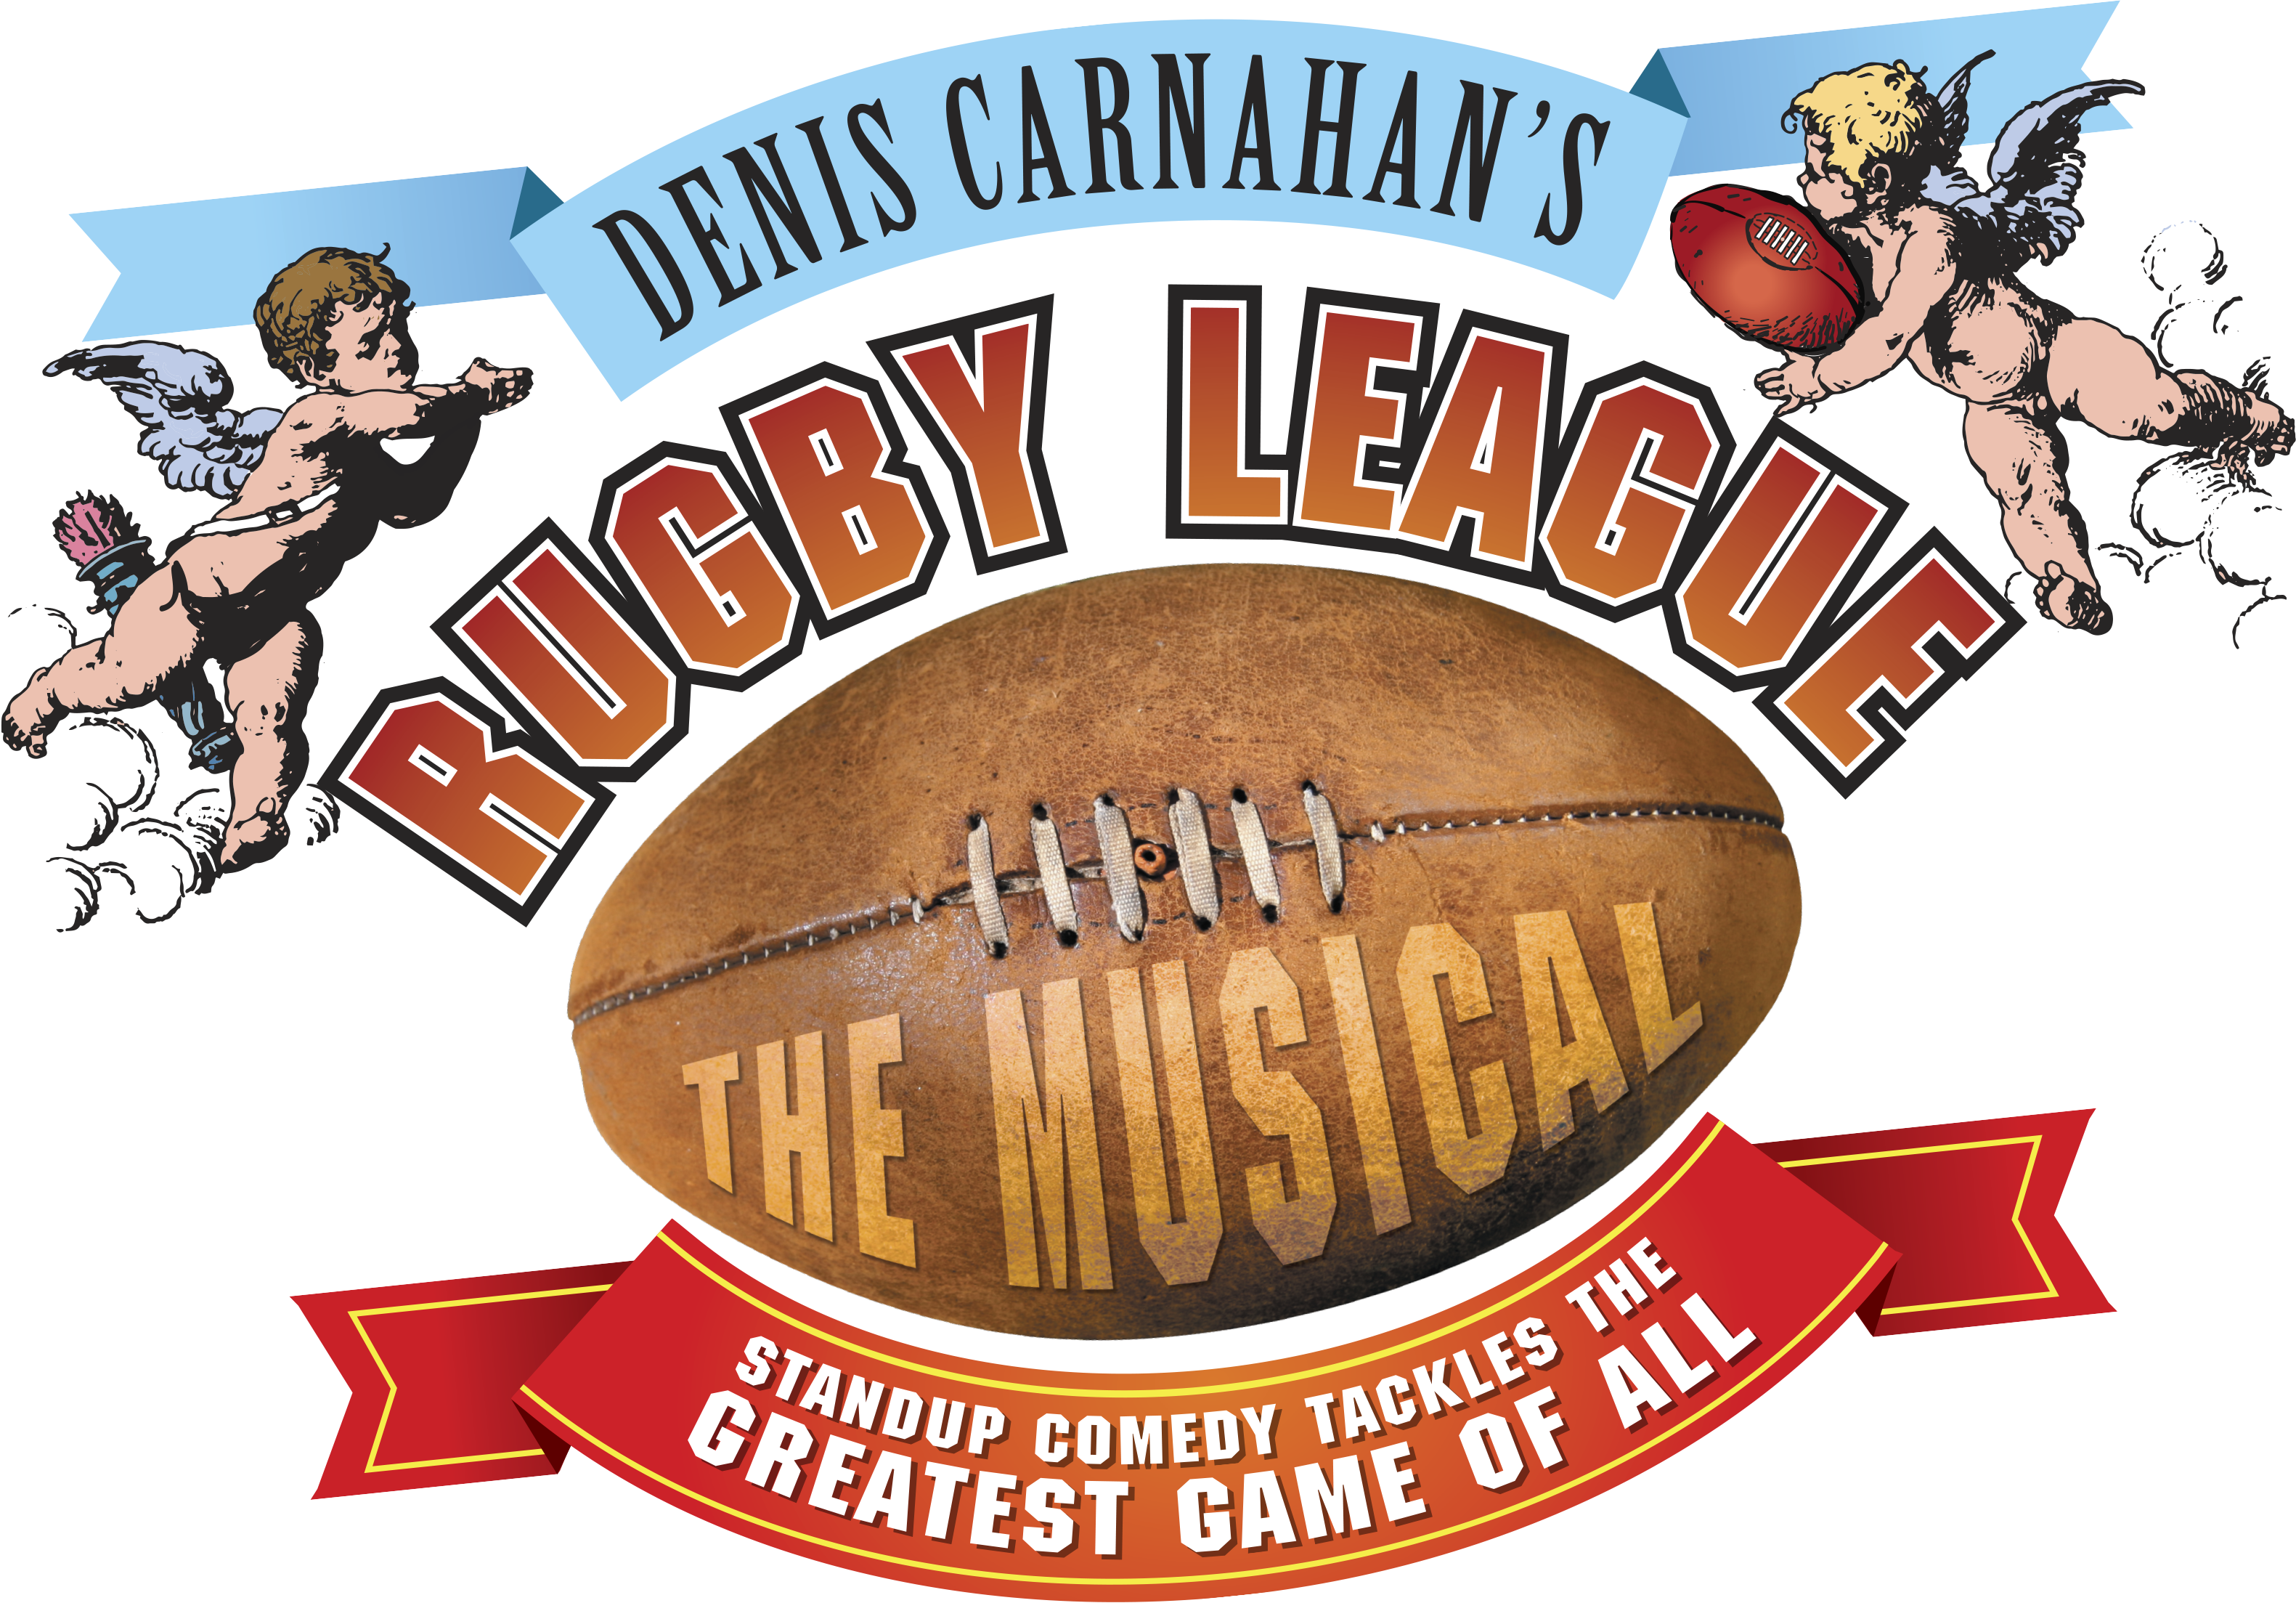 Rugby League The Musical